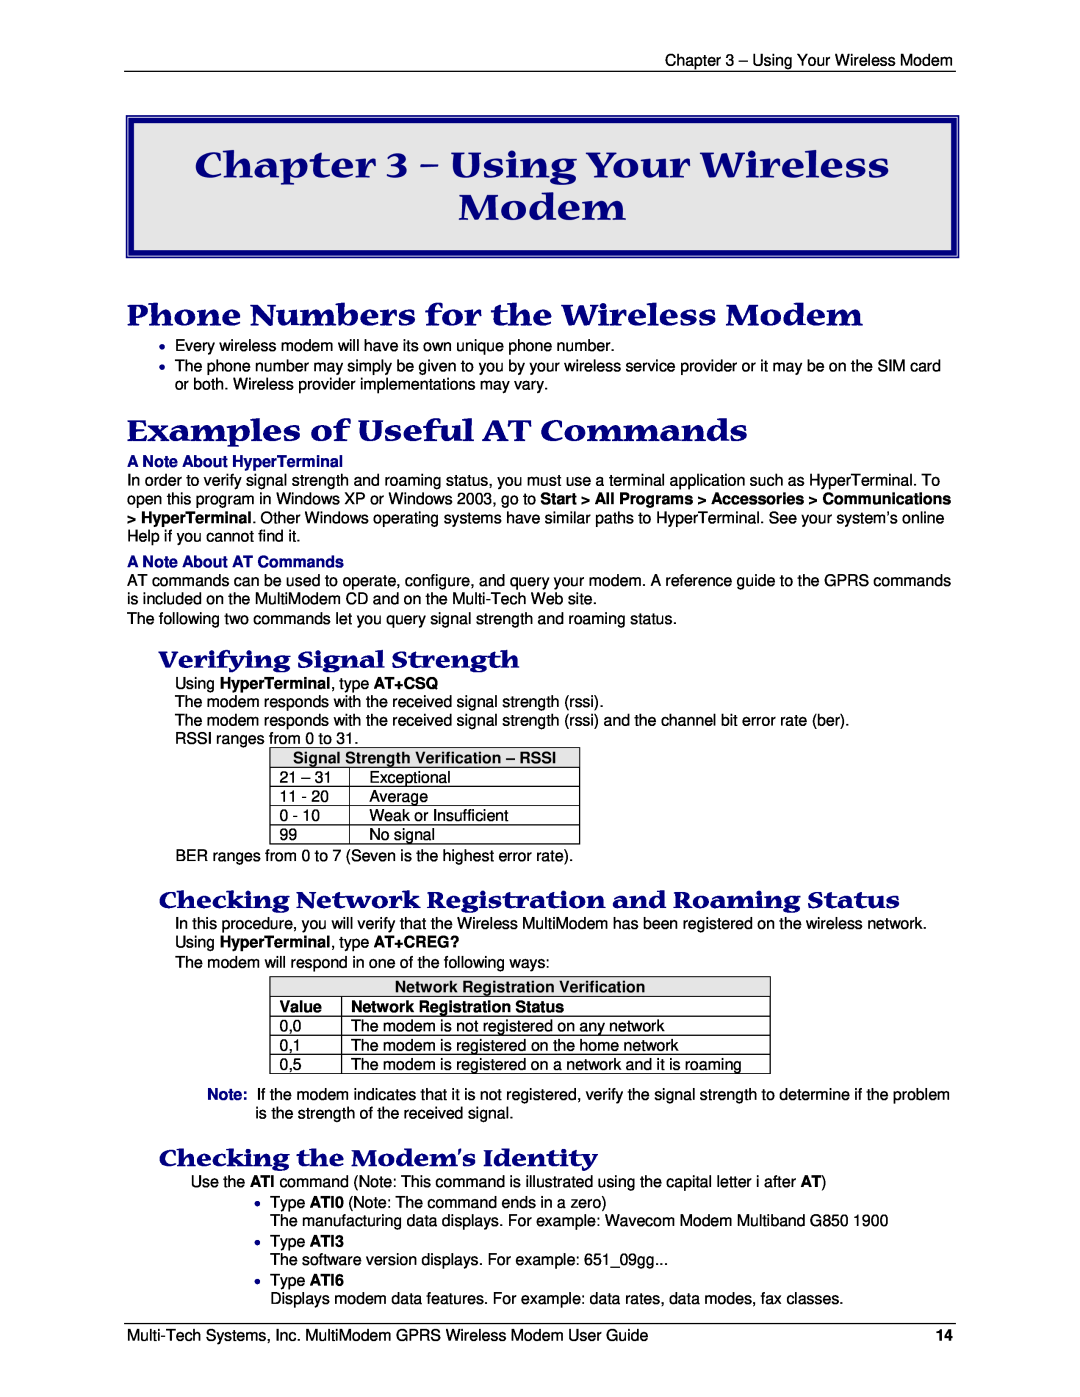 Multi-Tech Systems MTCBA-G-F1 Using Your Wireless Modem, Phone Numbers for the Wireless Modem, Verifying Signal Strength 